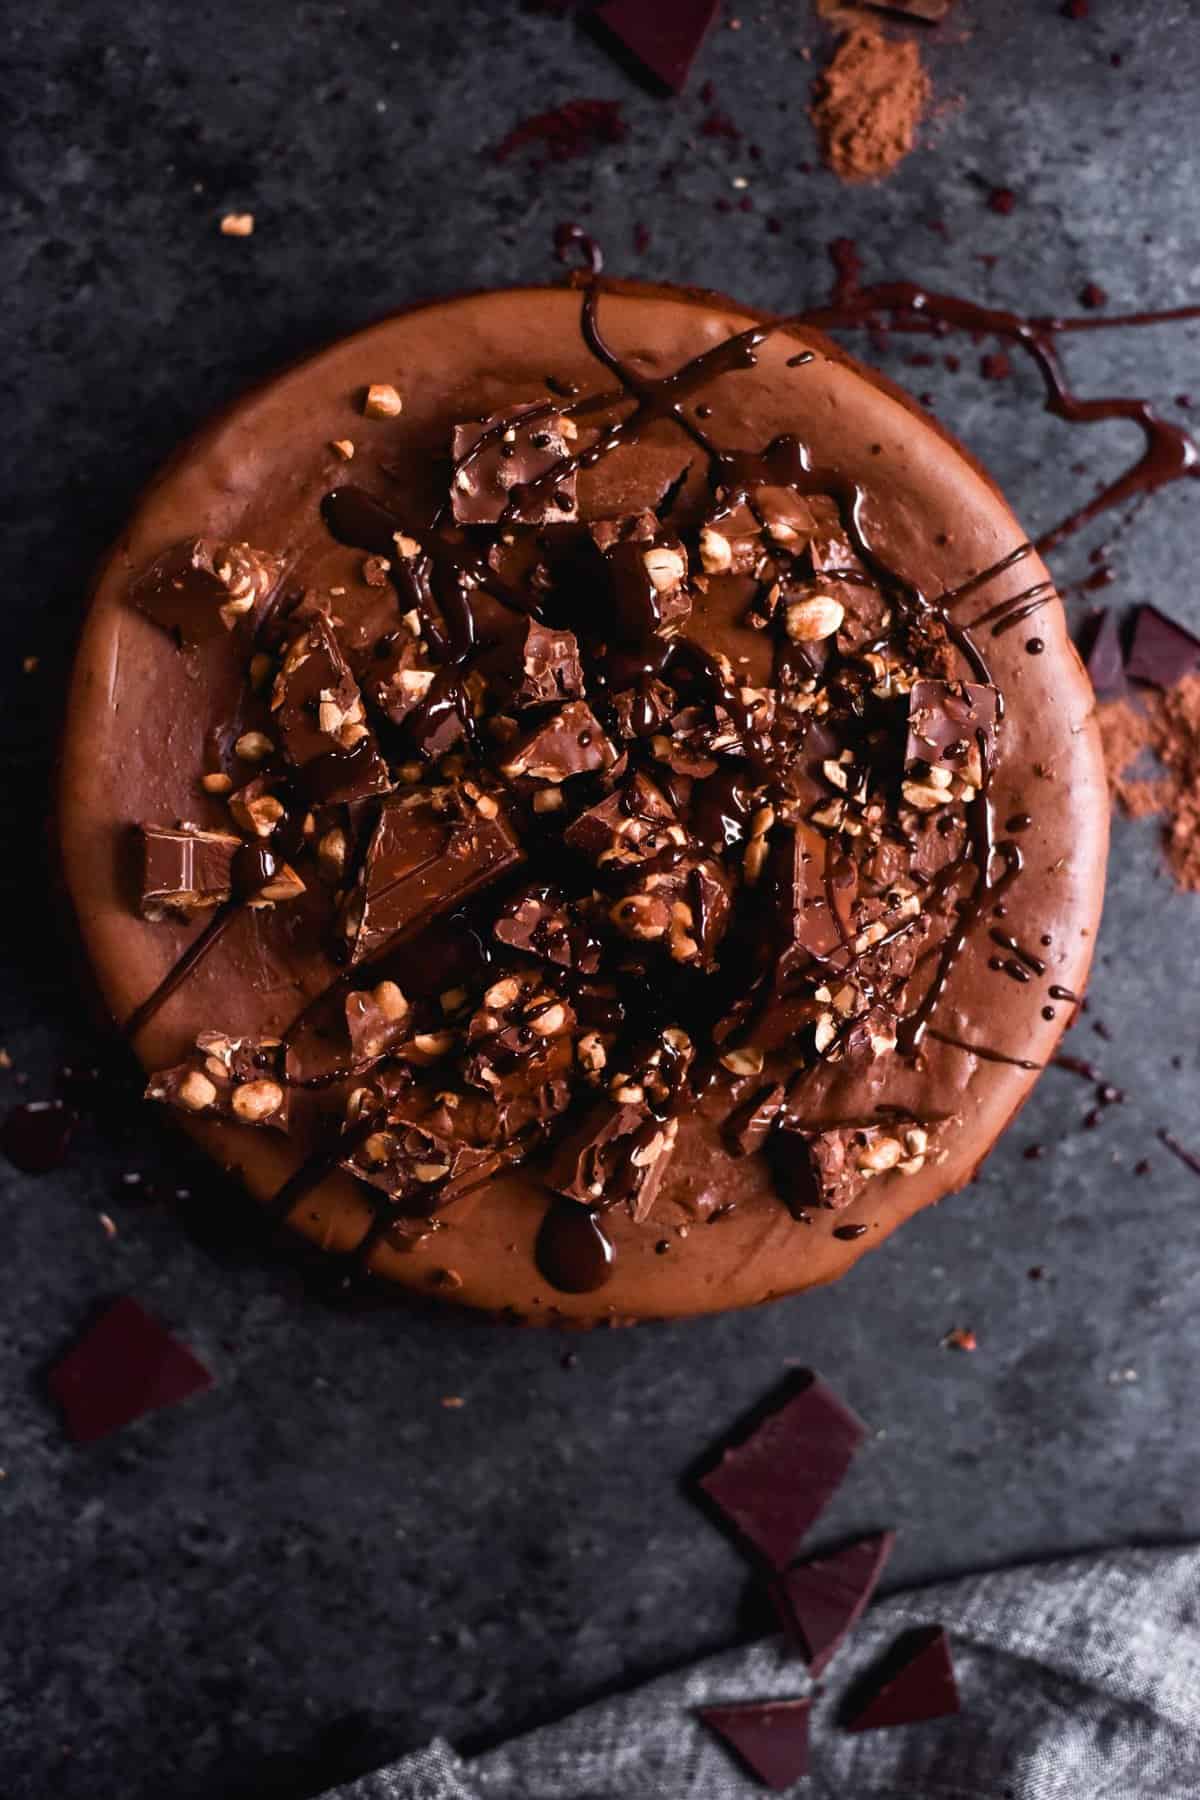 Gluten free chocolate and peanut butter cheesecake on a dark moody backdrop. The cheesecake is topped with melted chocolate drizzles and chopped peanut chocolate